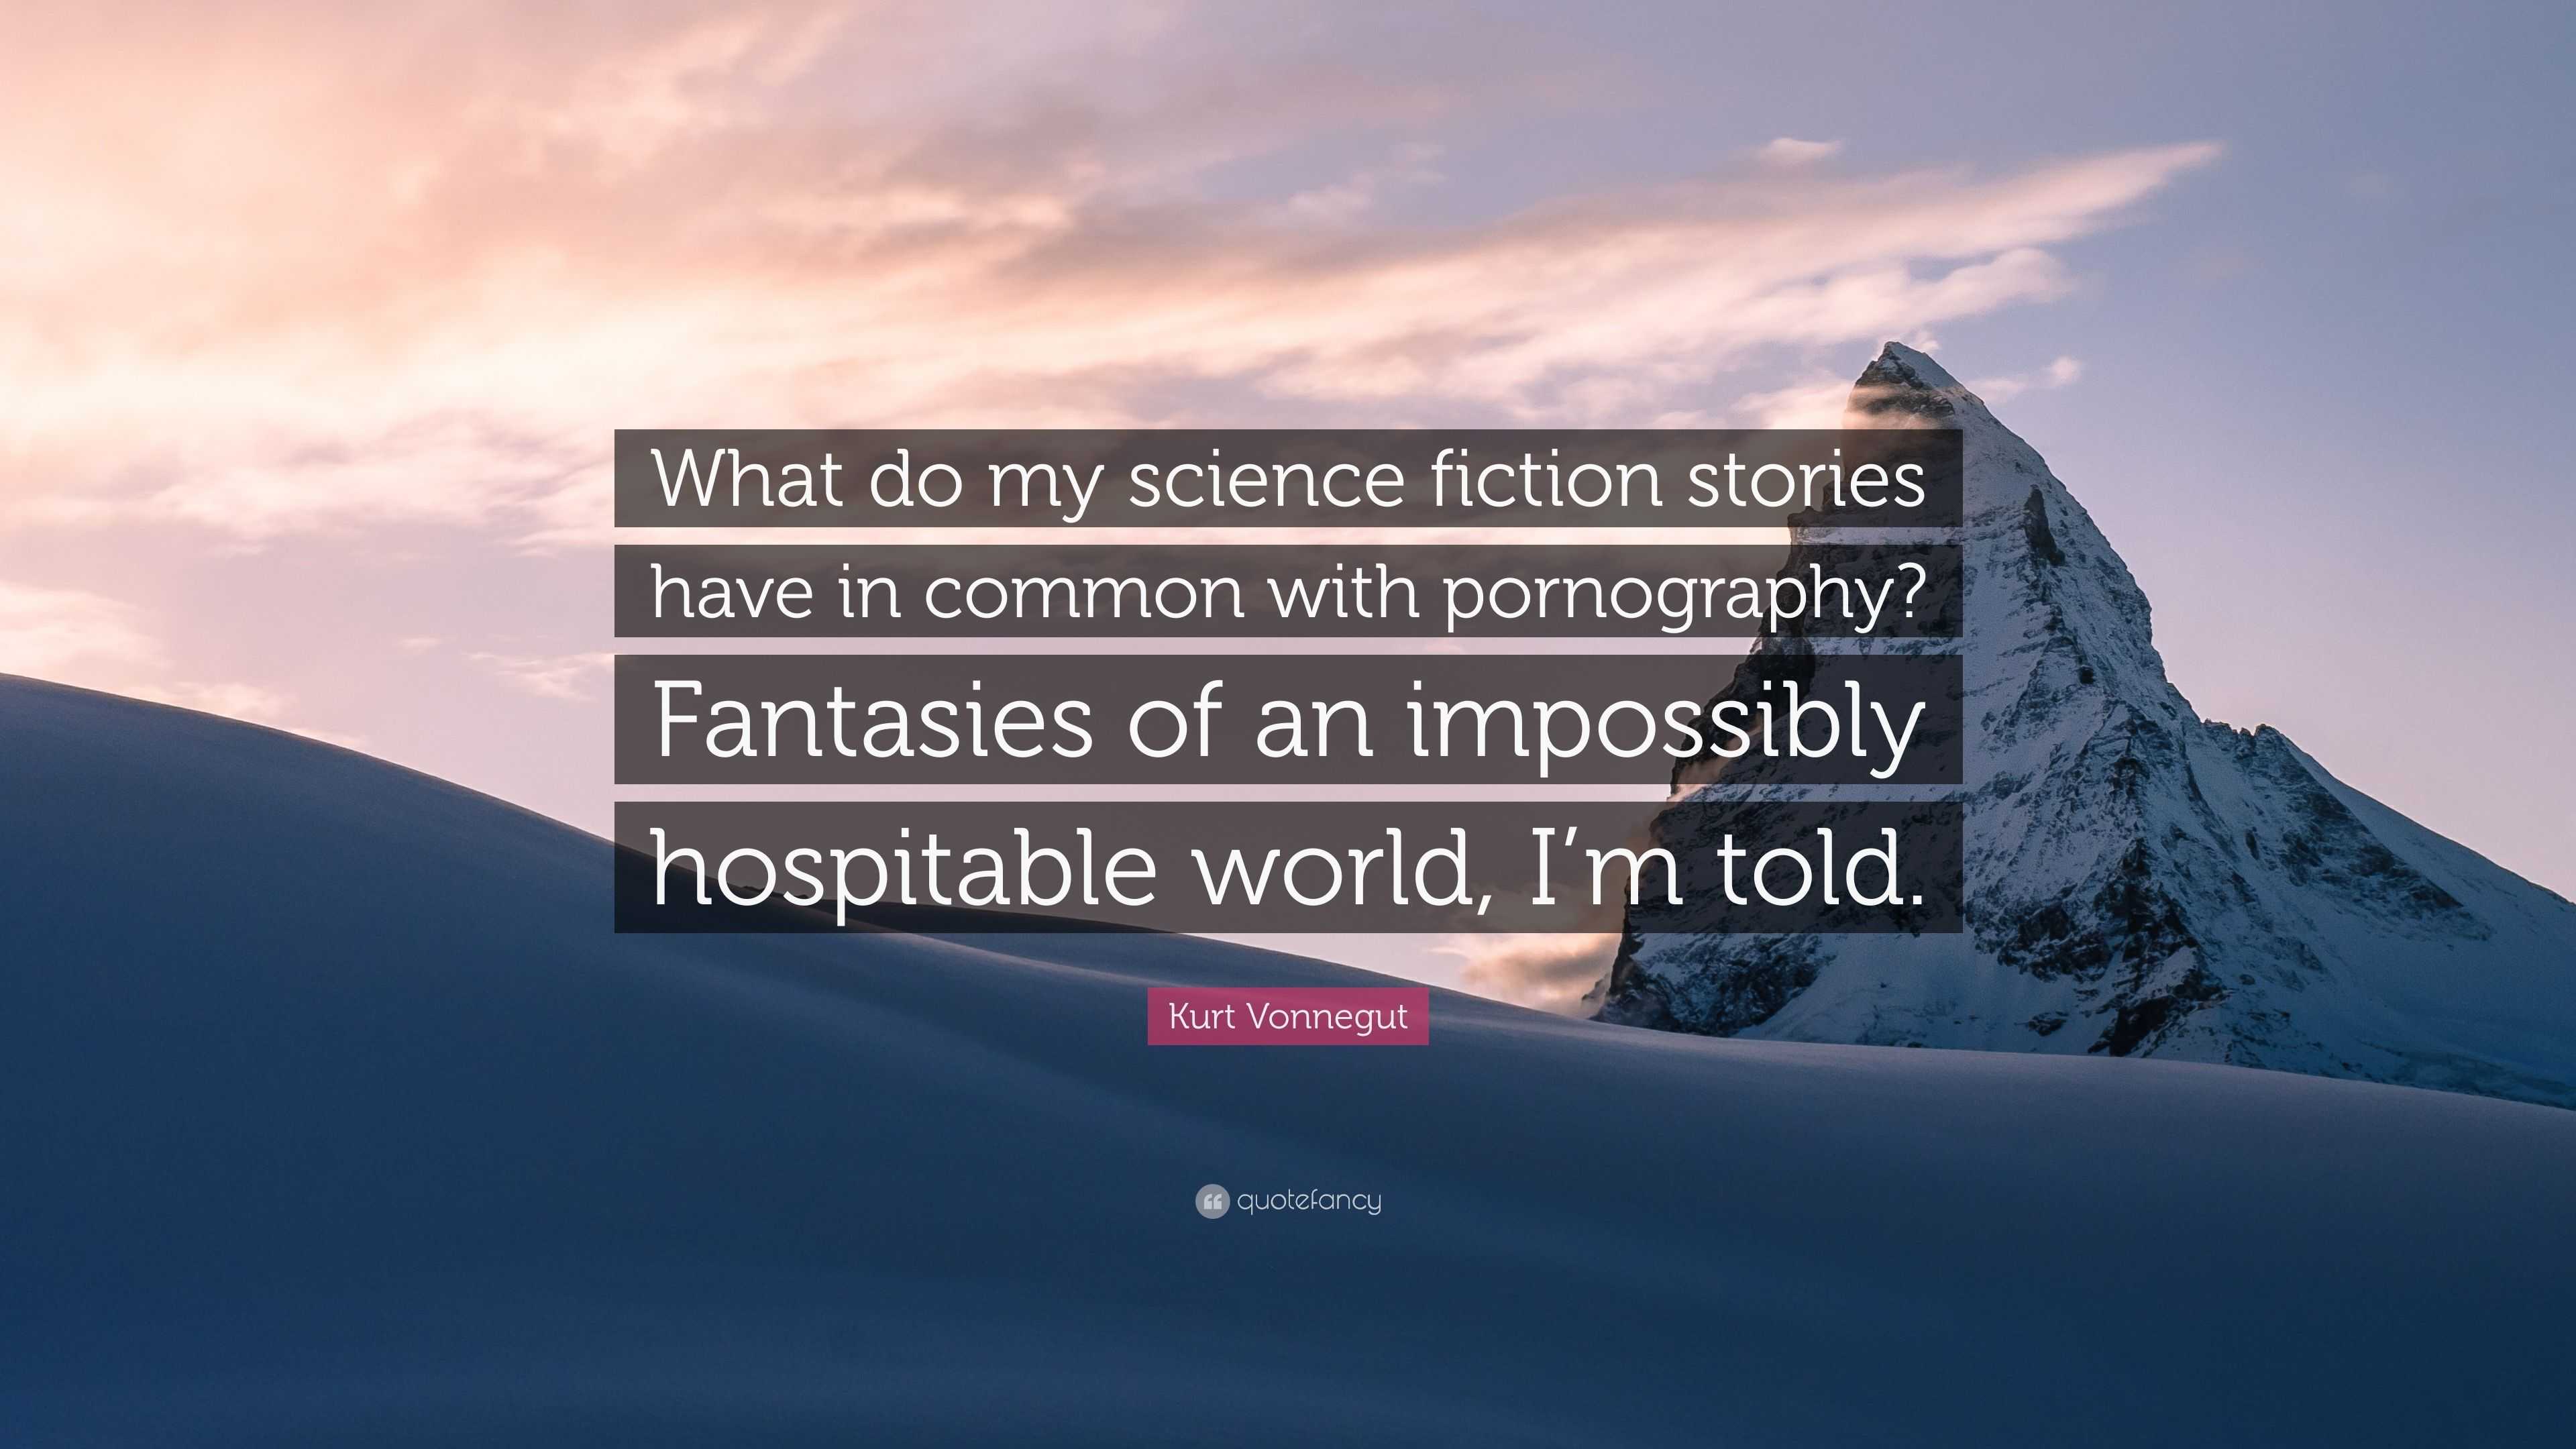 Kurt Vonnegut Quote: â€œWhat do my science fiction stories have in common  with pornography? Fantasies of an impossibly hospitable world, I'm tol...â€